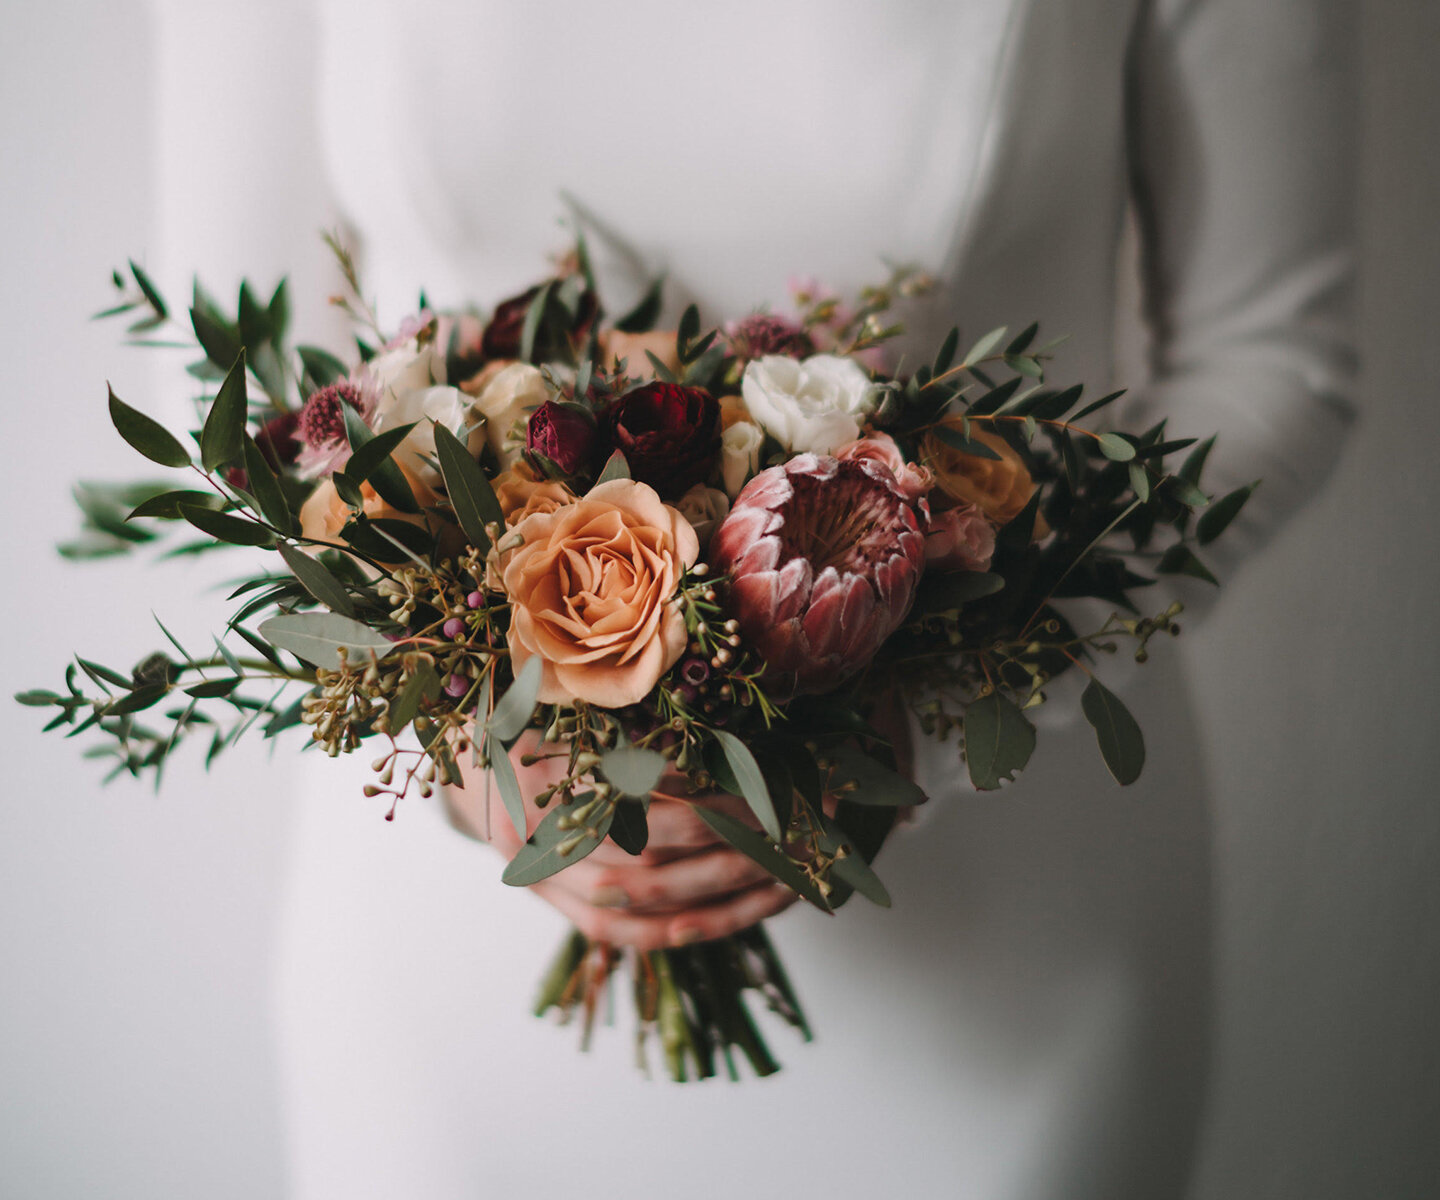 Bridal Bouquet Inspiration for Winter: 16 of the Prettiest Bouquets For Every Winter Wedding Style